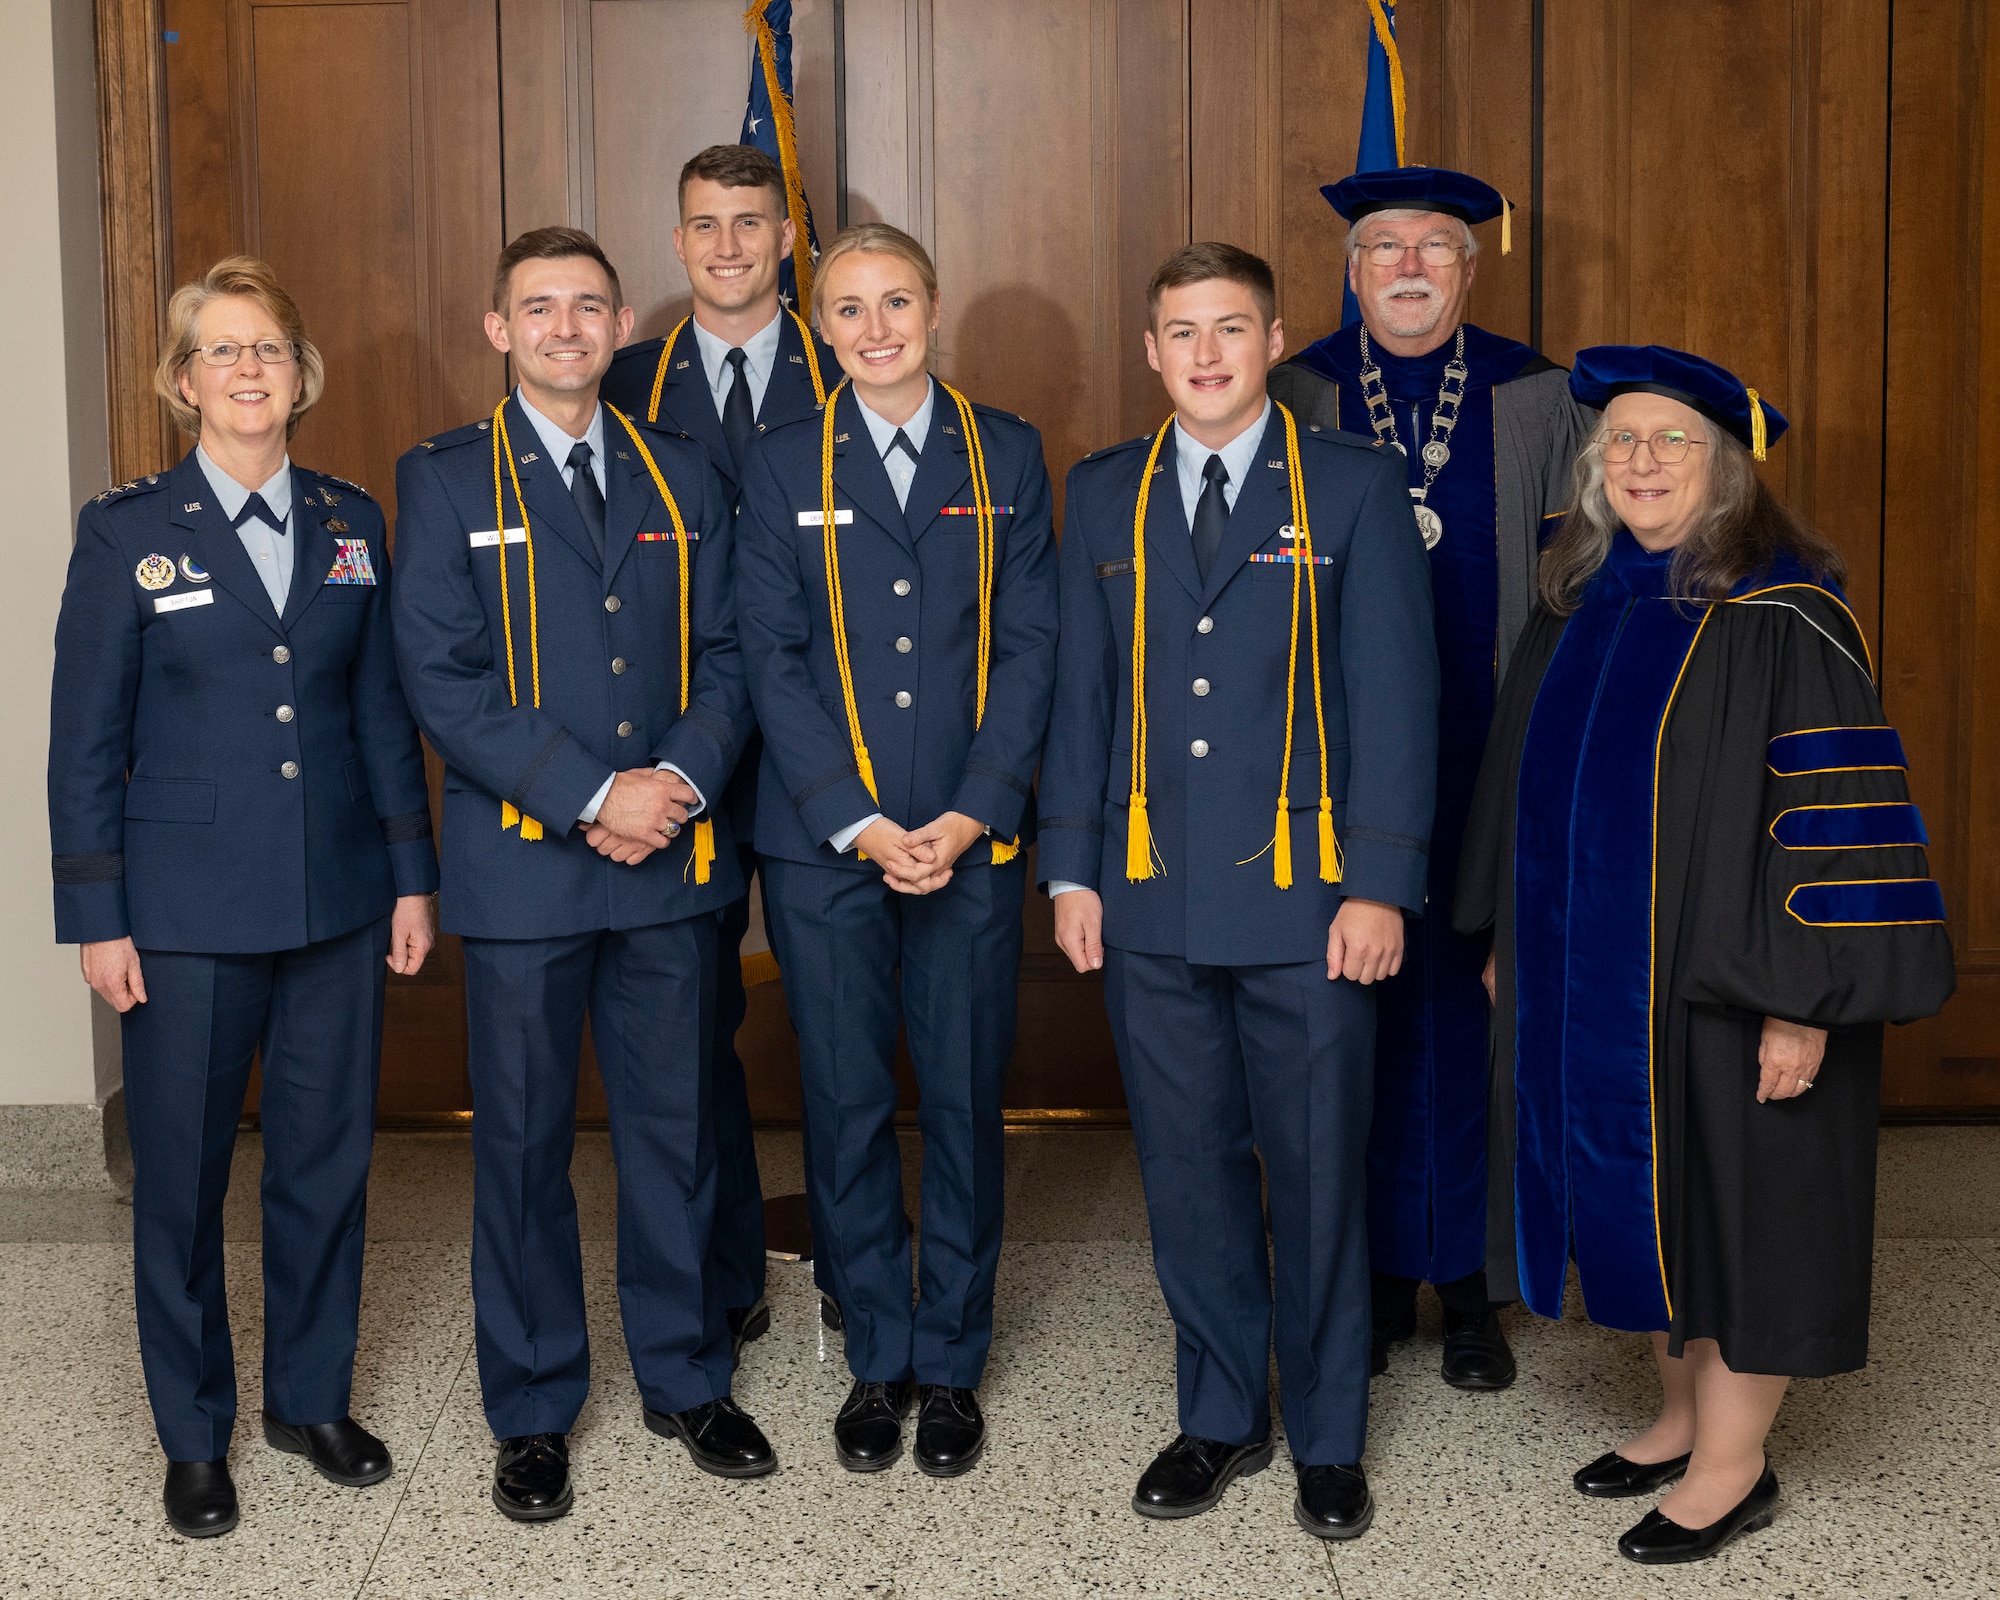 A group of three men and a woman, with a yellow cord draped from behind their necks down to their waist, pose with two people in academic robes and another woman in an Air Force uniform without a cord.